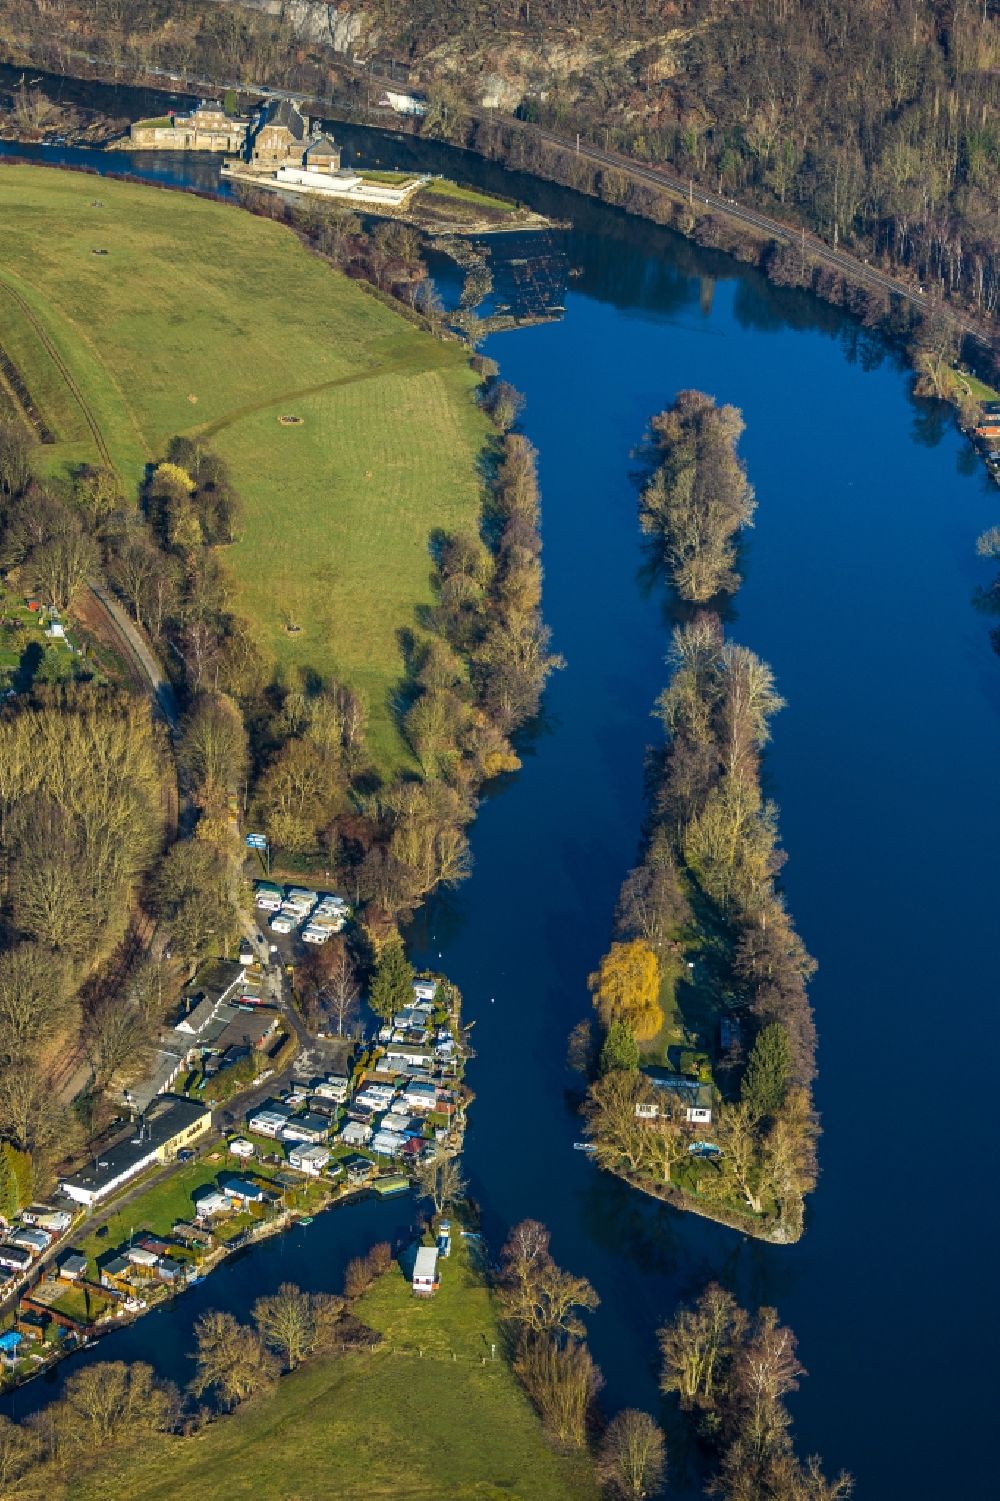 Witten from above - Island on the banks of the river course of Ruhr overlooking a campsite in the district Bommern in Witten in the state North Rhine-Westphalia, Germany